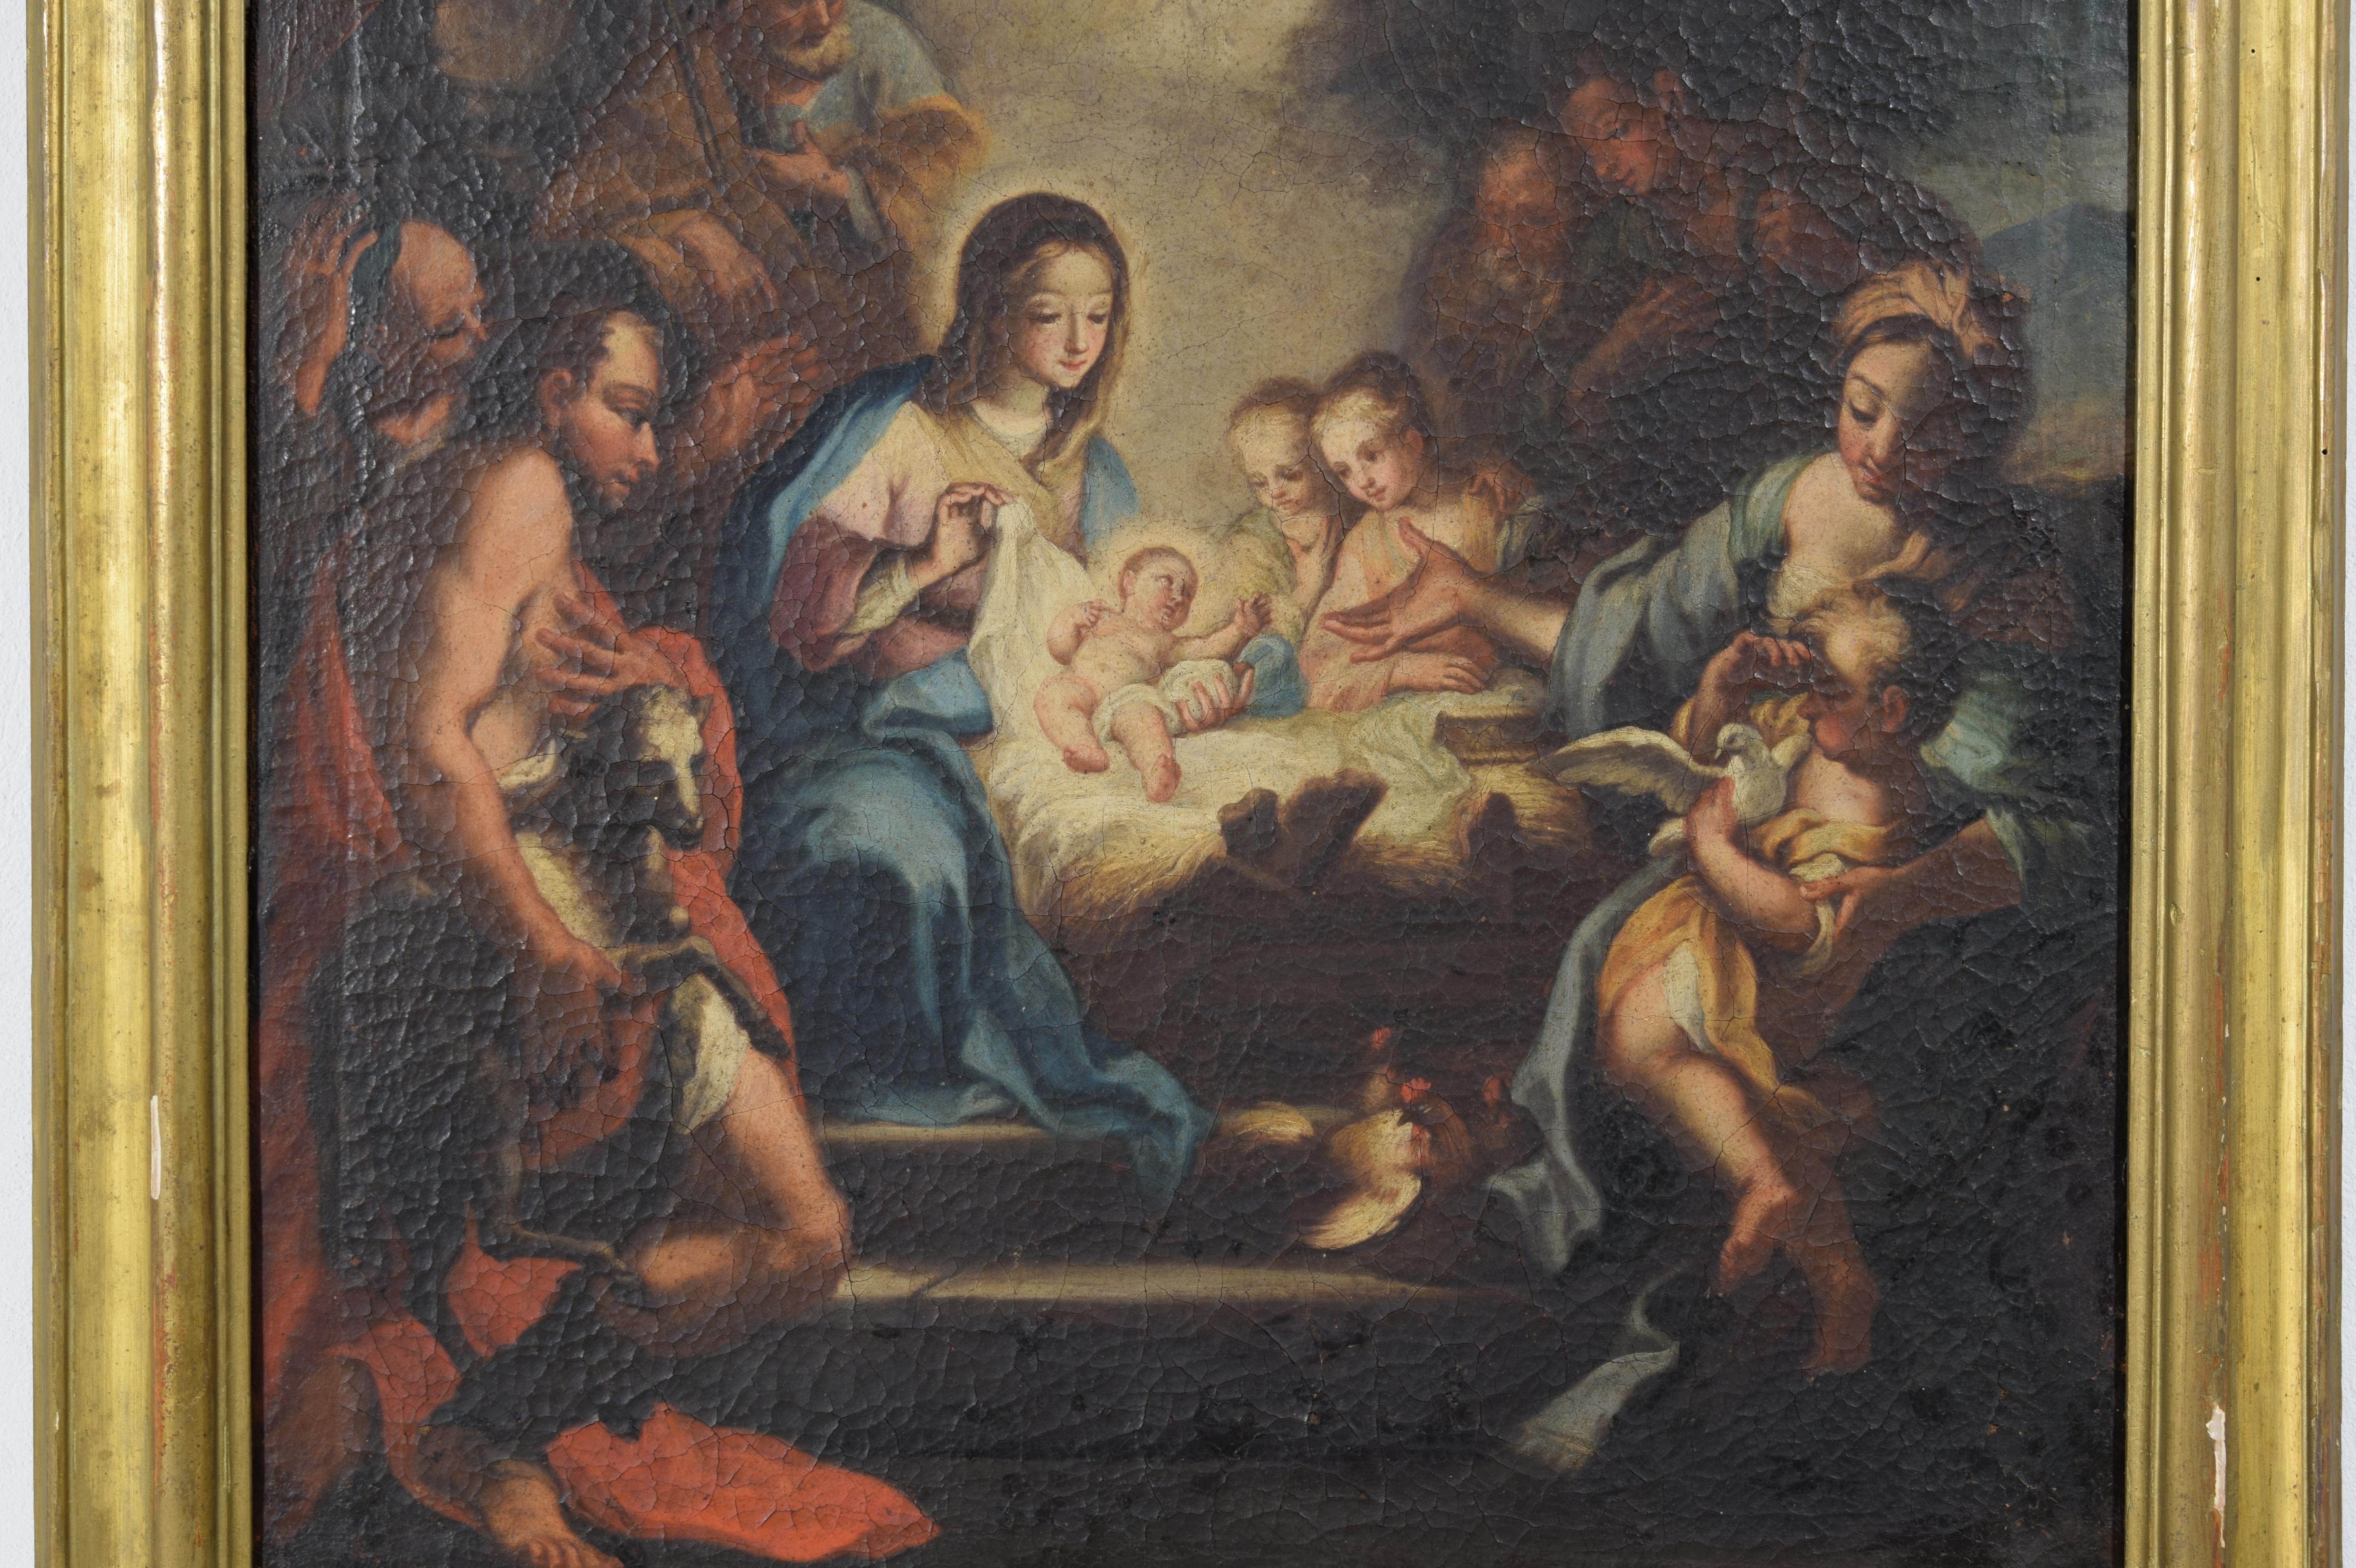 Rococo 18th Century, Italian Painting, Adoration of the Shepherds by Follower of Conca